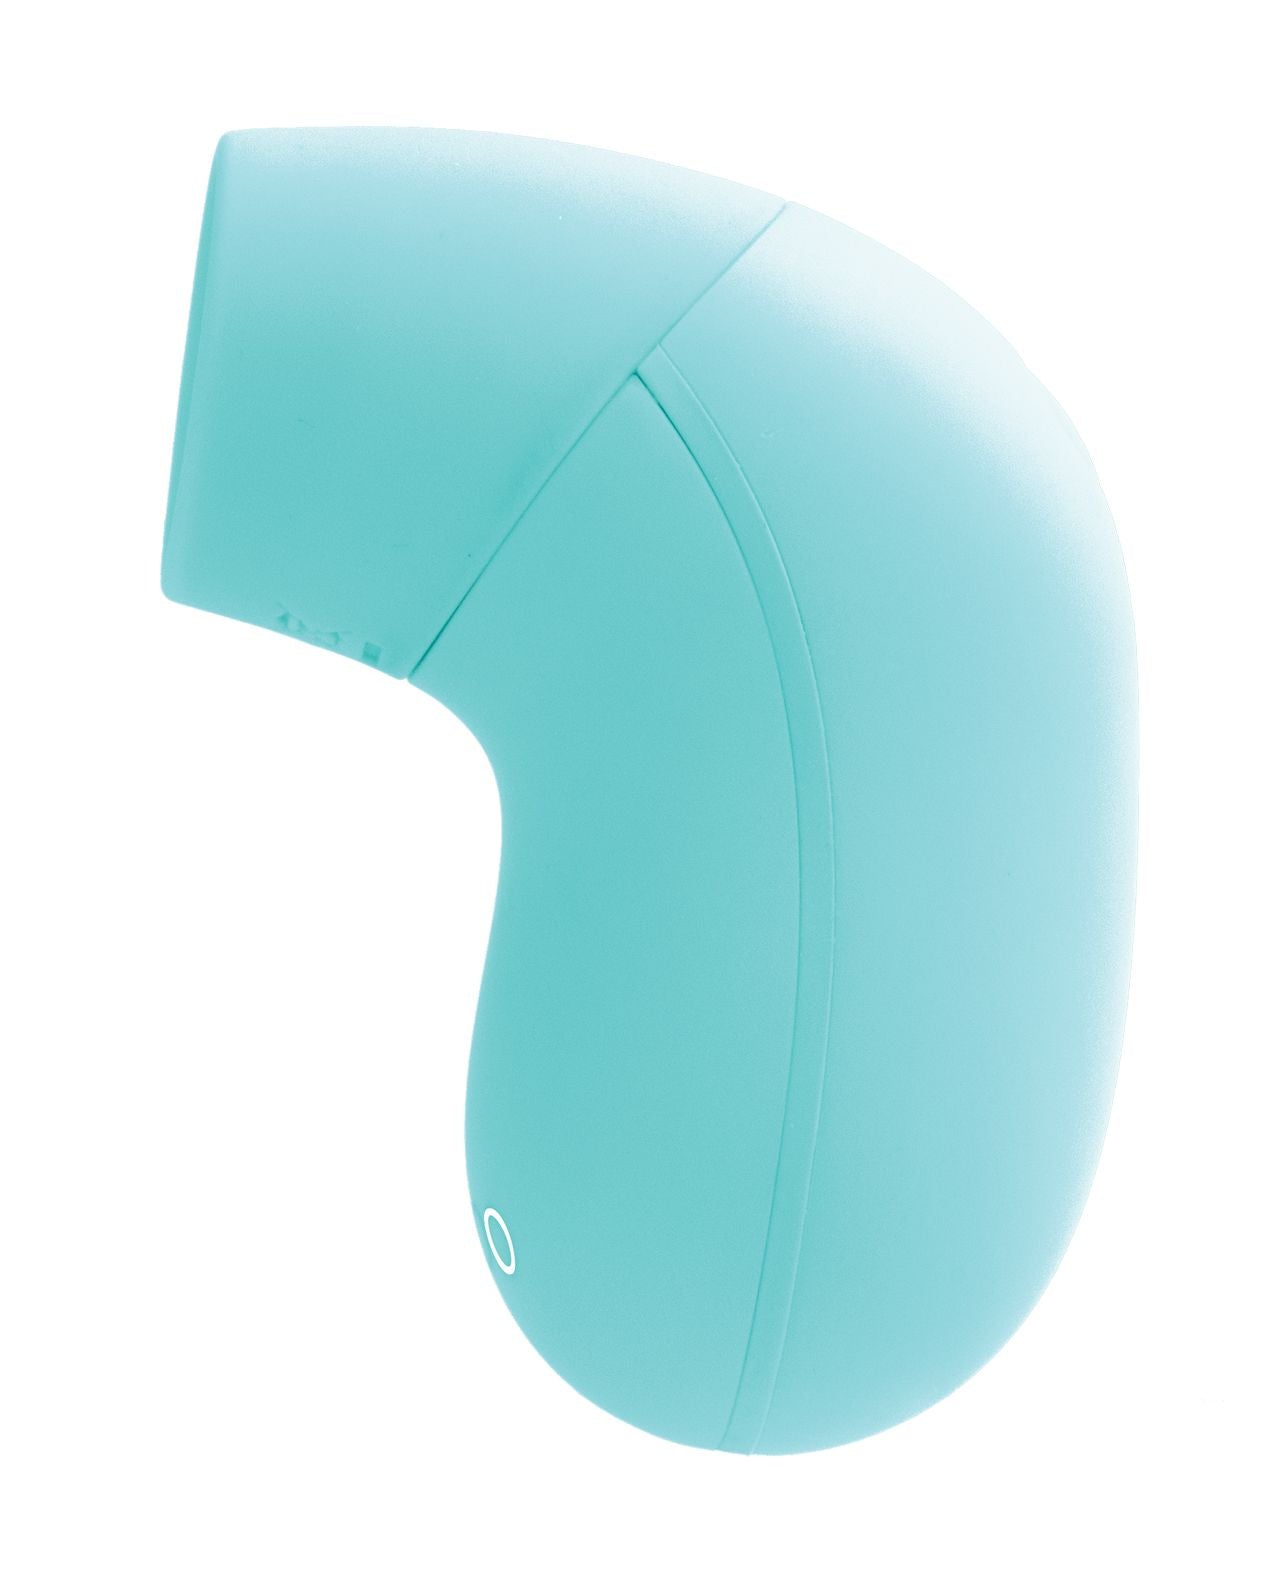 Side view of the sonic wave toy to show its ergonomic shape (turquoise).